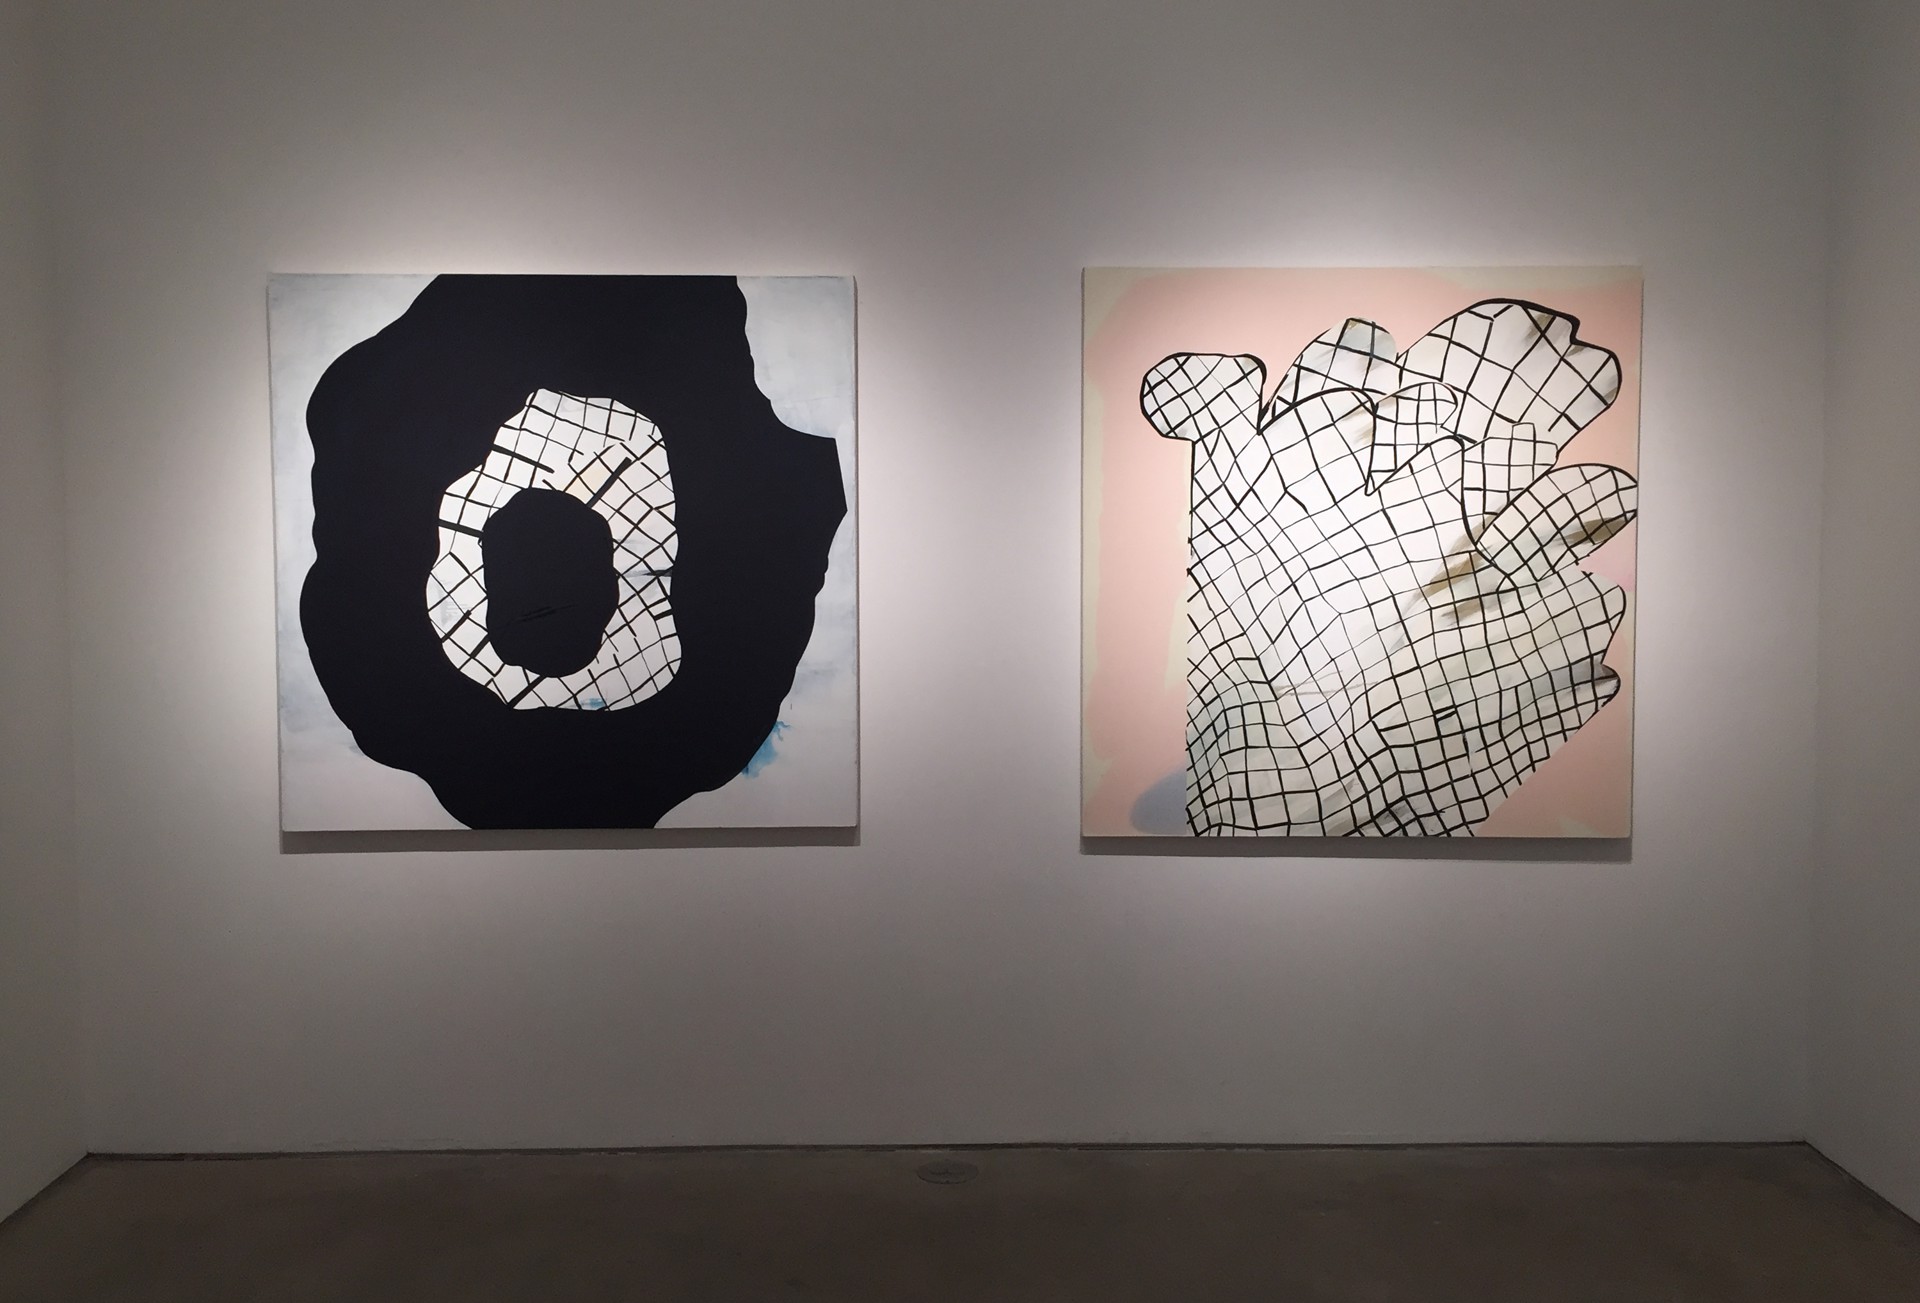 Installation: Muscle Painting (left) and Butterfly Effect (right) by Marcelyn McNeil